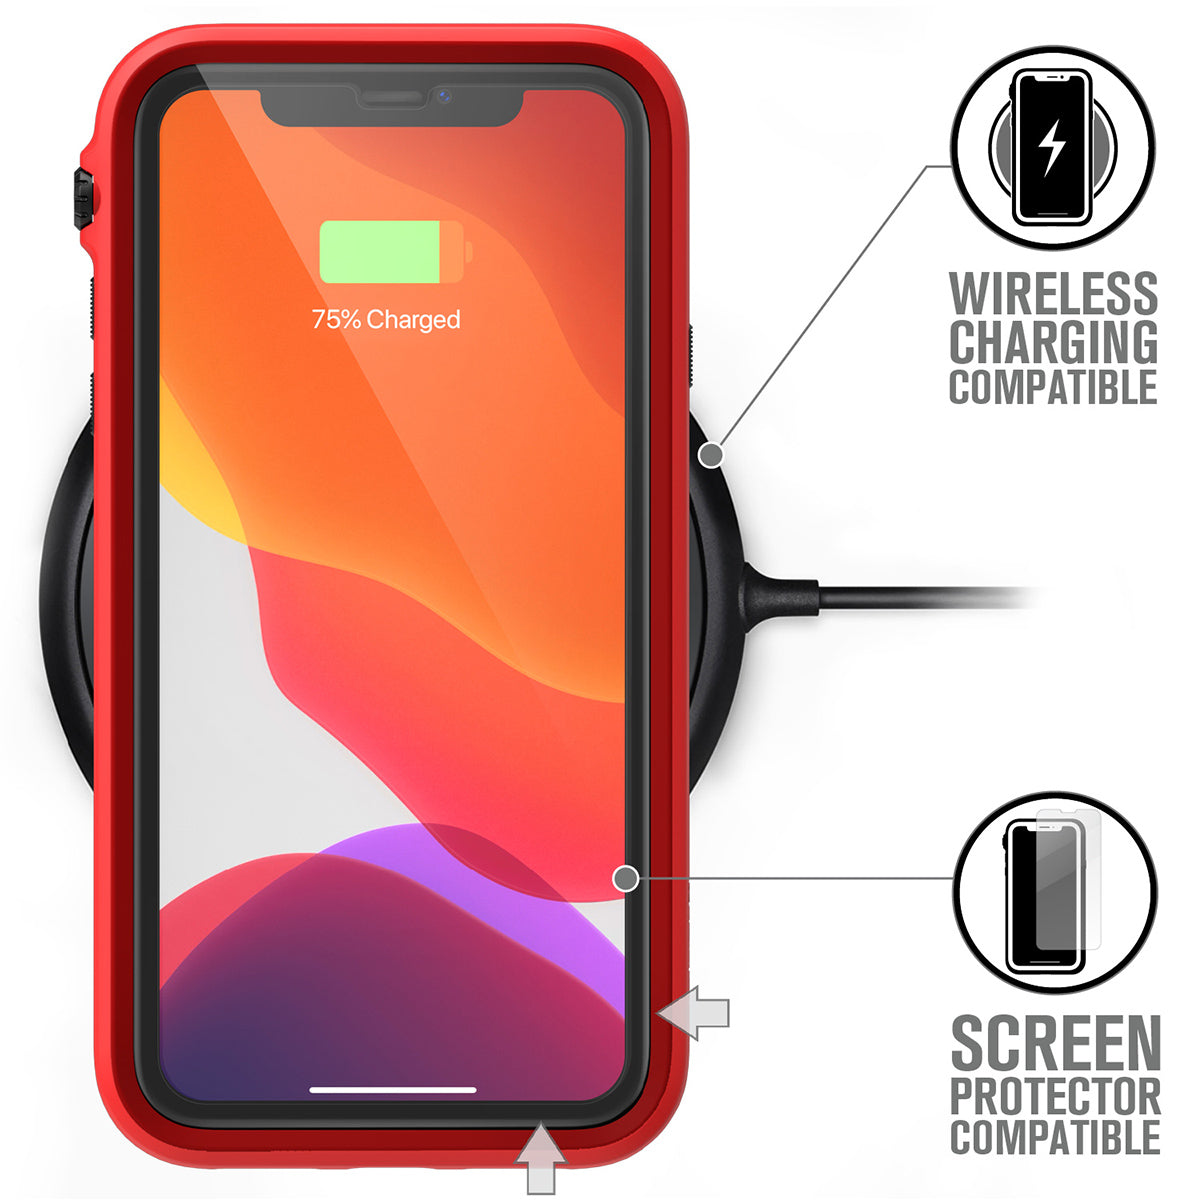 catalyst iPhone 11 series impact protection case for iphone 11 flame red placed on the wireless charger 75% charged text reads wireless charging compatible screen protector compatible